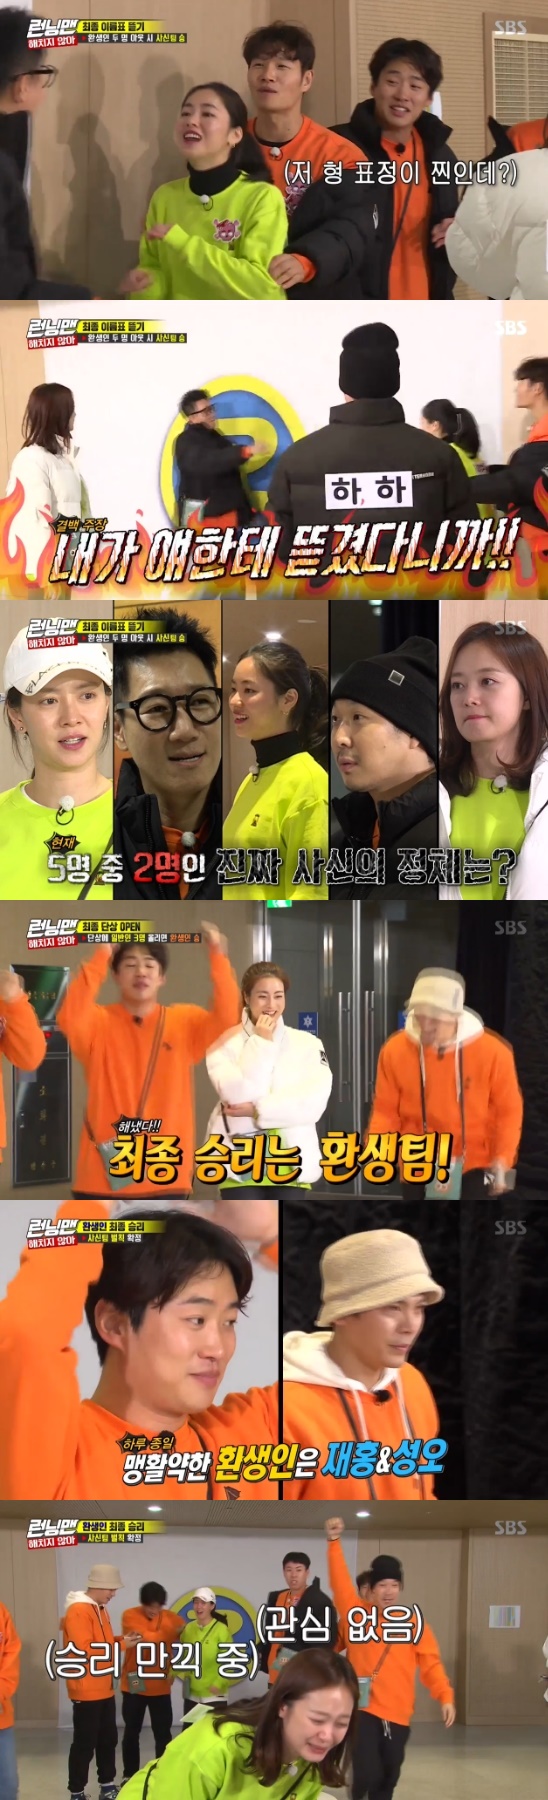 The team, which includes Running Man Ahn Jae-hong and Kim Sung-oh, won the final.On SBS Good Sunday - Running Man broadcast on the 12th, Kang So-ra, Haha, Ji Suk-jin and Lee Kwang-soo received water cannon penalties.On this day, Kim Sung-oh, Kang So-ra, Ahn Jae-hong, and the former Yeobin team arrived, and the I do not hurt race began.Two Dead Agains and two envoys were present for Dead Again; if there was an Earth 2 Dead Again, then the Team Victory, a Dead Again.However, after each round, the envoy was able to tear the Name tag for 10 minutes to make the Dead Again in-N-Out Burger.However, if there is a Earth 2 Dead Again, two more envoys will be drawn after the end of each round.The first mission was Rodeo and Juliet, which required a third-round success in a total of five rounds; Kim Sung-oh, who was first in the order, lasted a minute and 40 seconds with a tremendous ability.However, Jeon So-min did not eat jjajangmyeon for 1 minute and 40 seconds, and the members suspected that Jeon So-min was an envoy.Kang So-ra lasted 23 seconds. Yoo Jae-Suk said he would try to challenge the jjajangmyeon. Yoo Jae-Suk inhaled the jjajangmyeon without hesitation.Half the jjajangmyeon when it was over ten seconds. When it was twenty-three seconds, there was no noodle left in the bowl.Kim Jong-kook slickly covered the front of the camera, while other members also surrounded Yoo Jae-Suk; the crew said it was a success.Then there were two Yoo Jae-Suk and Kang So-ra, and Kang So-ras name tag was torn.Kang So-ra said he ripped the name tag off Yoo Jae-Suk, but Yoo Jae-Suk claimed that Kang So-ra ripped it off on his own.Kang So-ra suddenly lay on the floor and claimed innocence.Kim Jong-kook said Kang So-ra was not an envoy.Kim Jong-kook revealed that the hint he saw reads: Among the living to date, there are no female guests included.Then Yoo Jae-Suk quickly admitted, Well then its me, and laughed.The final mission was later launched: Kim Sung-oh and Ahn Jae-hong secretly made a tangent, planning; the two were Dead Again.At the time of the pre-mission, the production team said that they were dead Again, tearing and re-attaching the name tag of the two.The Dead Again found the number of envoys included in the three names that wanted to find the name tag hidden in the building.Ahn Jae-hong was convinced Yang Se-chan was an envoy.Ahn Jae-hong discovered the name tag of Jeon Yeo-bin and Ji Suk-jin following the Yang Se-chan Name tag; the number of envoys included among the three was one.Then suddenly Kang So-ra ripped off Kim Jong-kook, Yang Se-chans Name tag, as Kang So-ra became an envoy after the third round.The two were ordinary people, and it was revealed that the remaining Lee Kwang-soo was an envoy.Lee Kwang-soo said, How much I have done, what if I tear the chan?The envoys Lee Kwang-soo, Yoo Jae-Suk, convinced that Kim Sung-oh and Ahn Jae-hong who were not in their seats were Dead Again, rushed to rip the name tag.Yang Se-chan blocked Lee Kwang-soo, while Ahn Jae-hong put Lee Kwang-soo in the In-N-Out Burger.There were ex-Jeobin, Ji Suk-jin, but ex-Jeobin, Ji Suk-jin, pointed out that each other was an envoy; the envoy was Ji Suk-jin.Later, Ahn Jae-hong put Kim Jong-kook, Yang Se-chan and Song Ji-hyo on the podium.Of the three, there were no envoys, and the Dead Again team won the final victory; neither did Jeon So-min.Kang So-ra, Haha, Ji Suk-jin and Lee Kwang-soo are facing water cannon penalties.Photo = SBS Broadcasting Screen